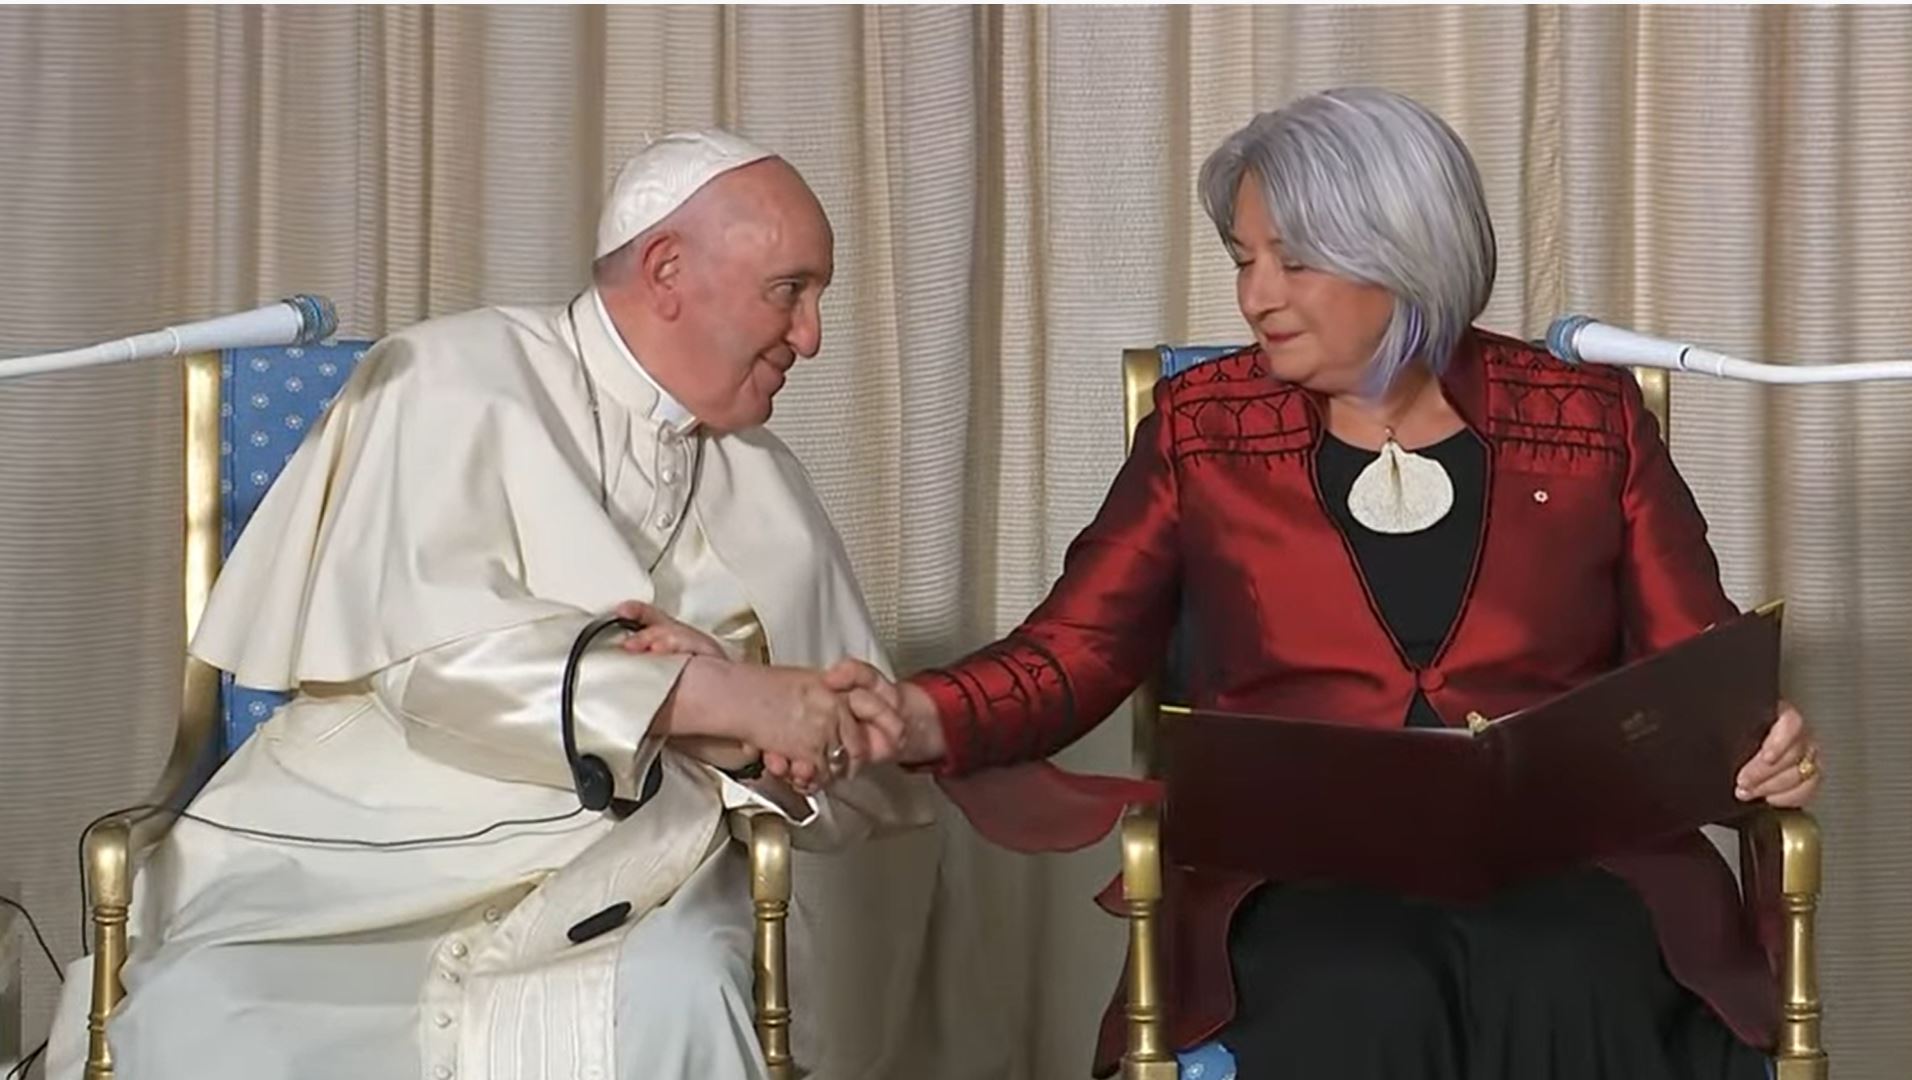 Pope and Mary shake hands